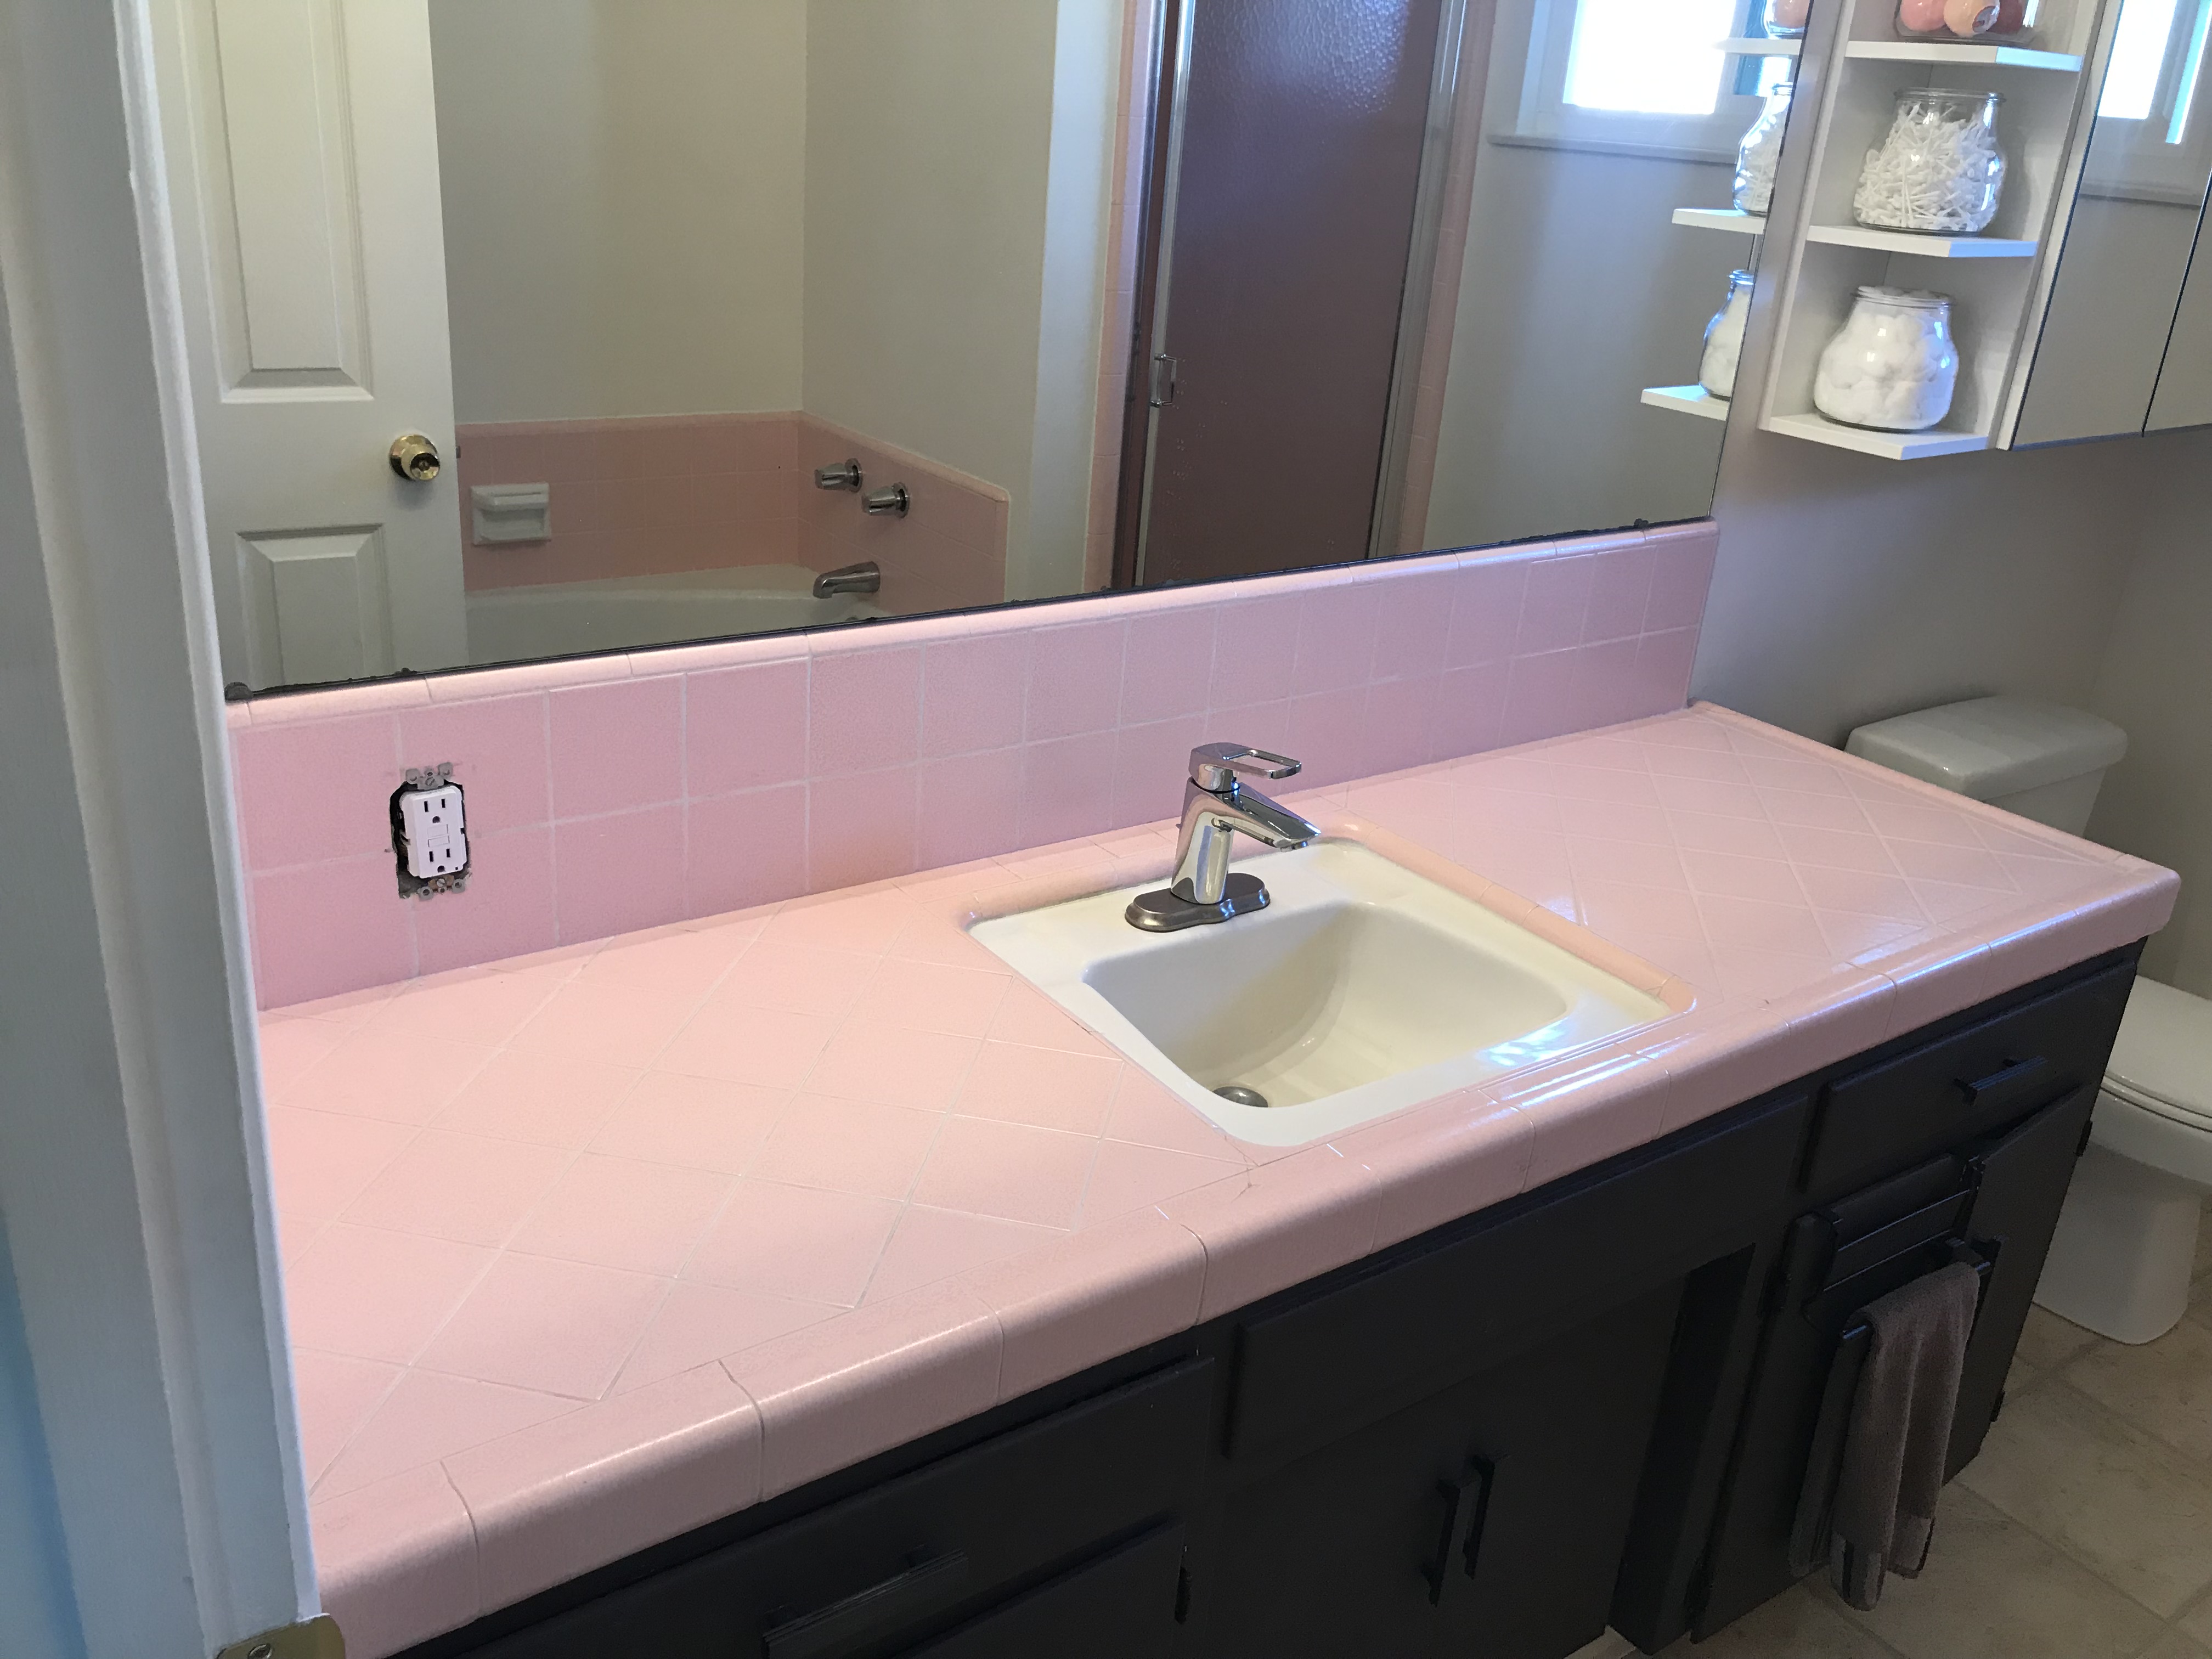 Countertop refinishing and sink re-glazing before - NuFinishPro